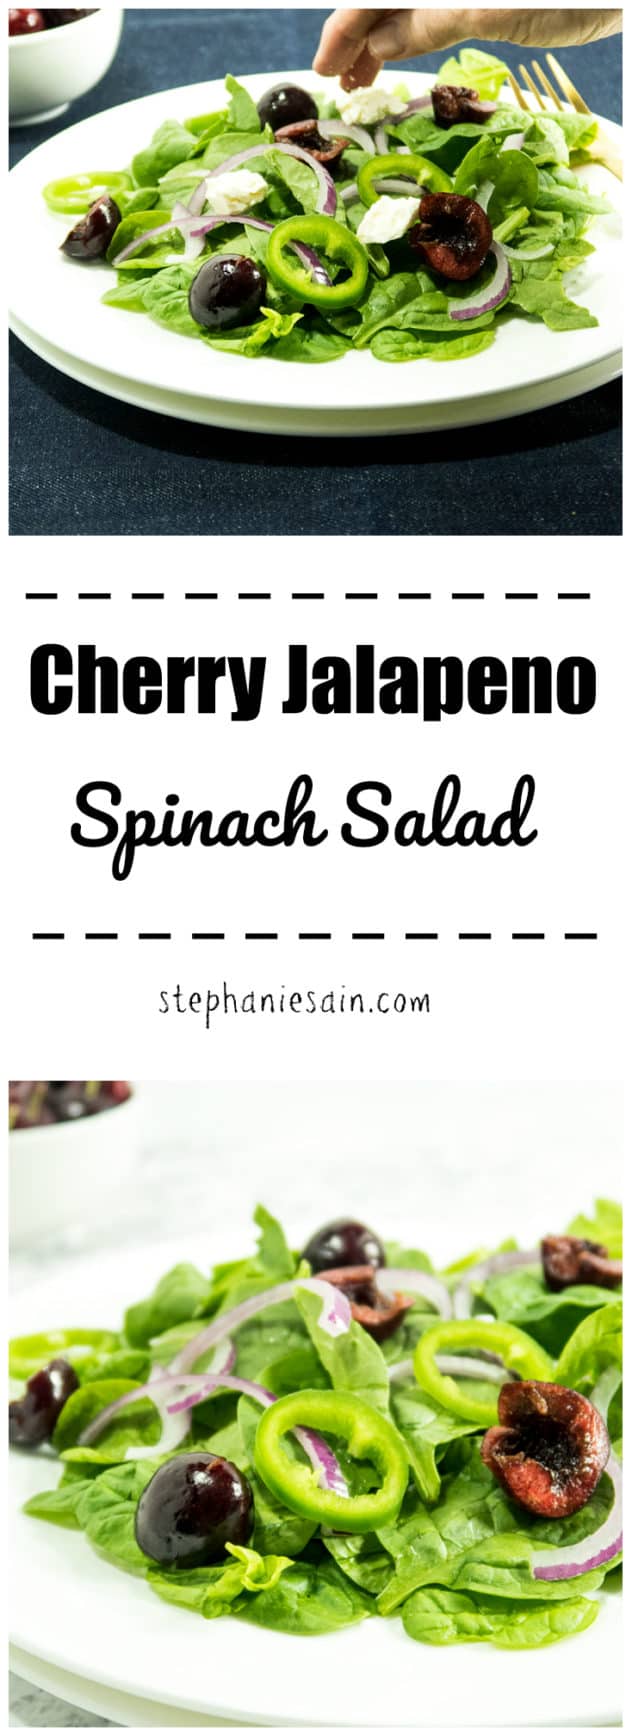 Cherry Jalapeno Spinach Salad is a light, refreshing summer salad. Bursting with sweet cherries, jalapeno and a balsamic vinaigrette. Gluten Free & Vegan Option.